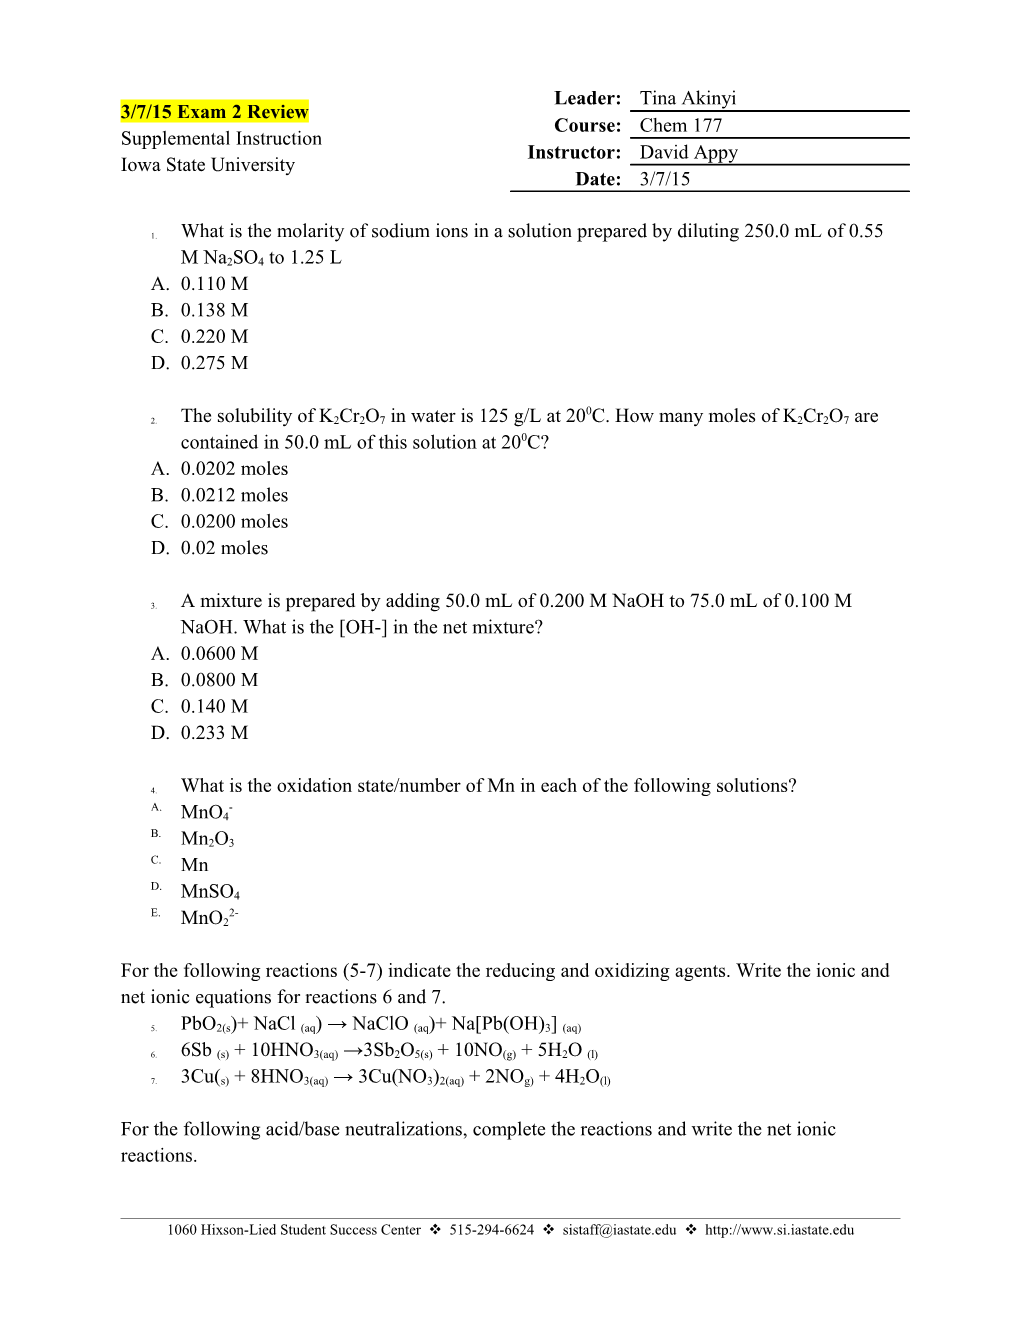 What Is the Molarity of Sodium Ions in a Solution Prepared by Diluting 250.0 Ml of 0.55